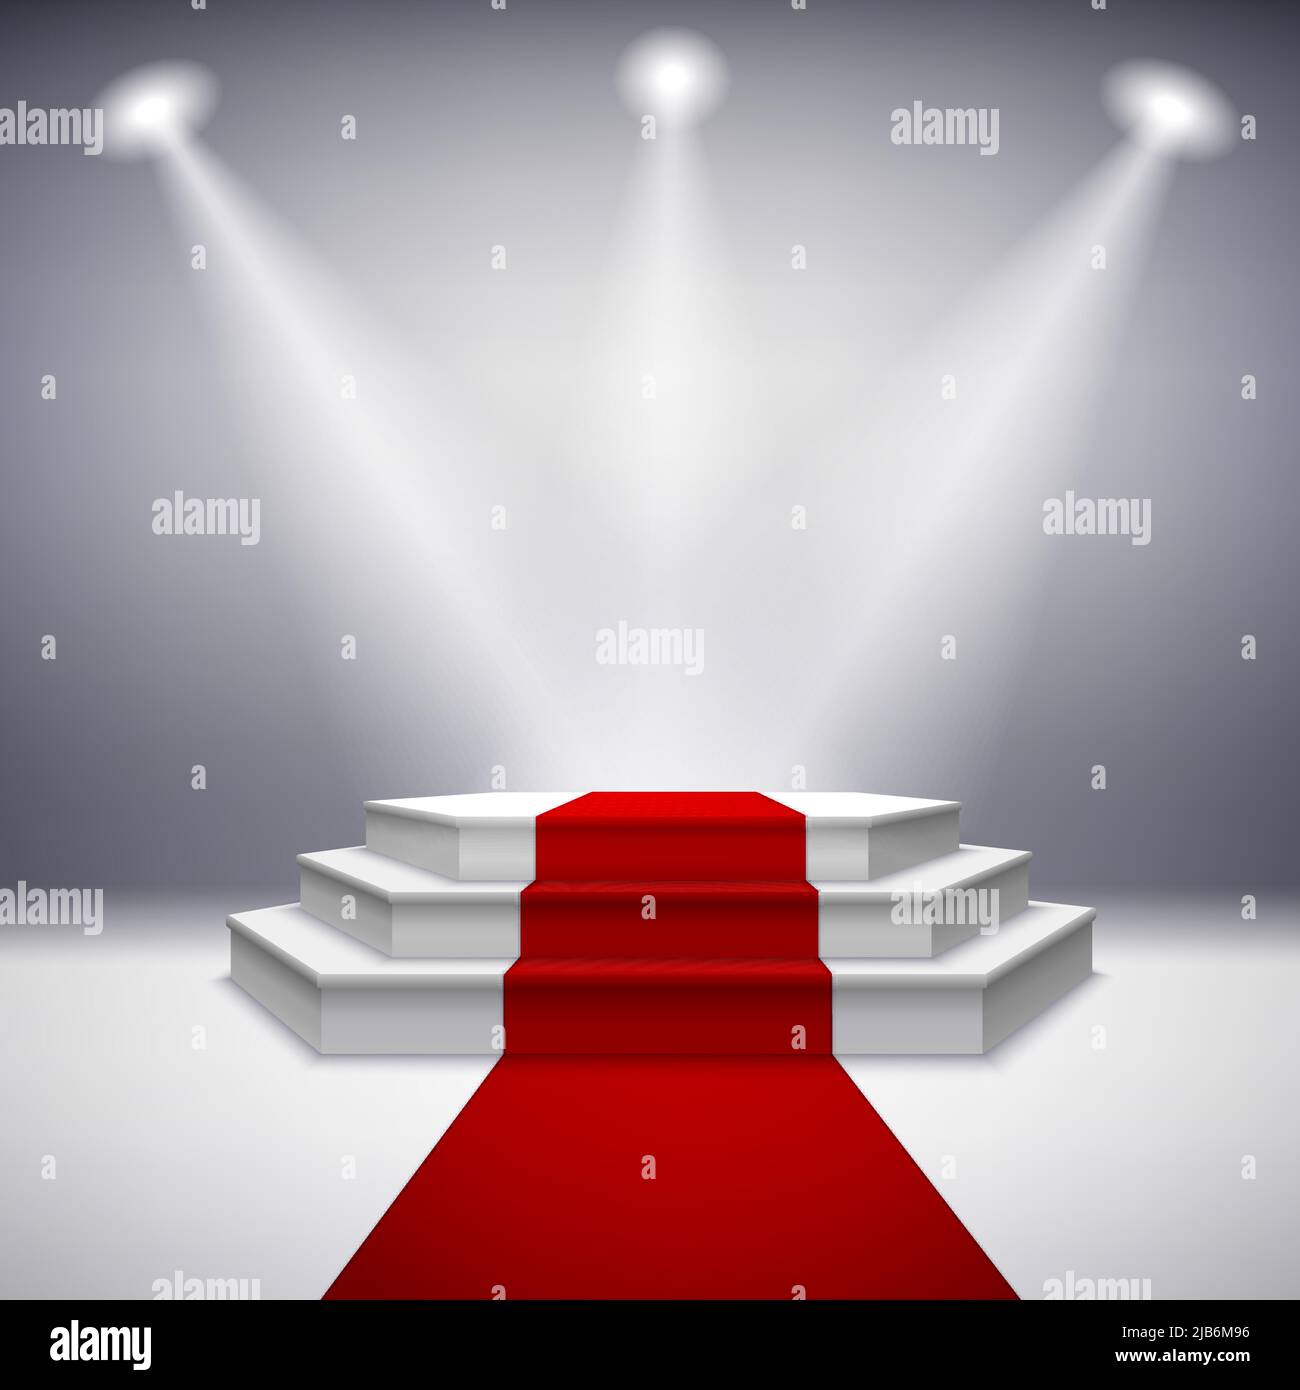 Illuminated stage podium with red carpet for award ceremony vector illustration Stock Vector